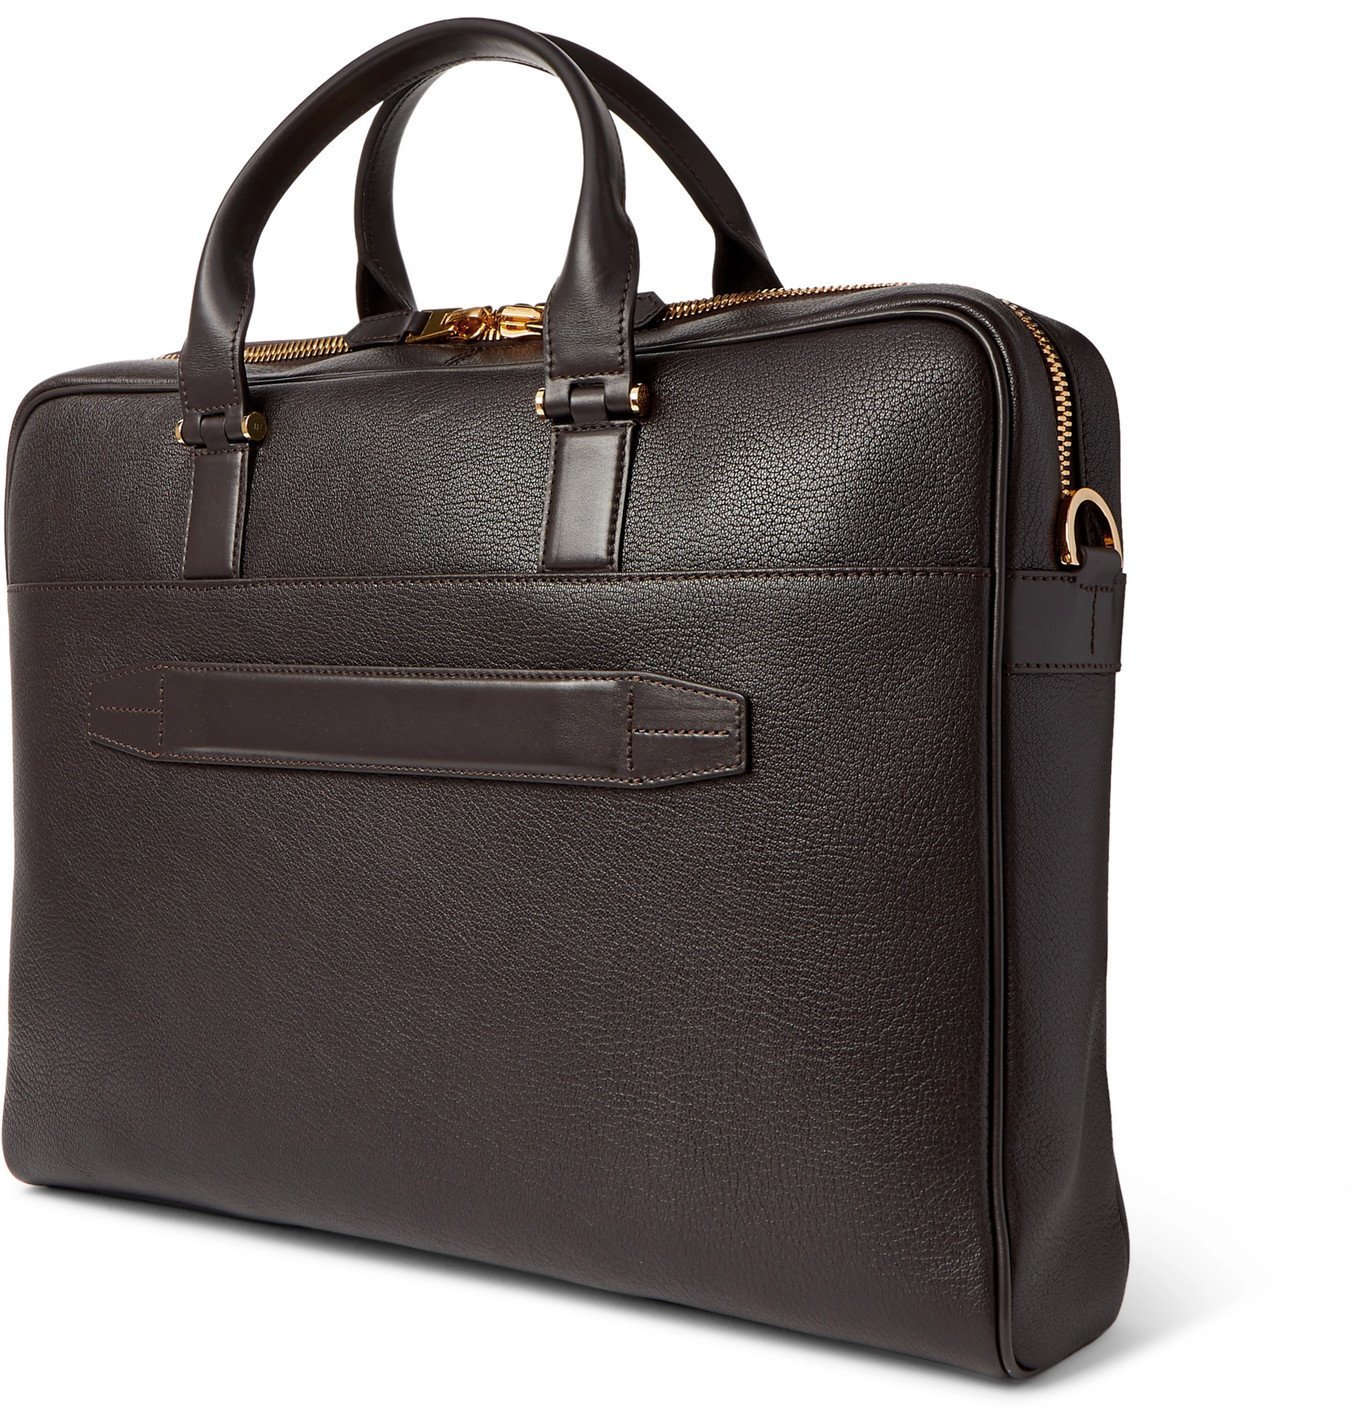 TOM FORD - Full-Grain Leather Briefcase - Brown TOM FORD